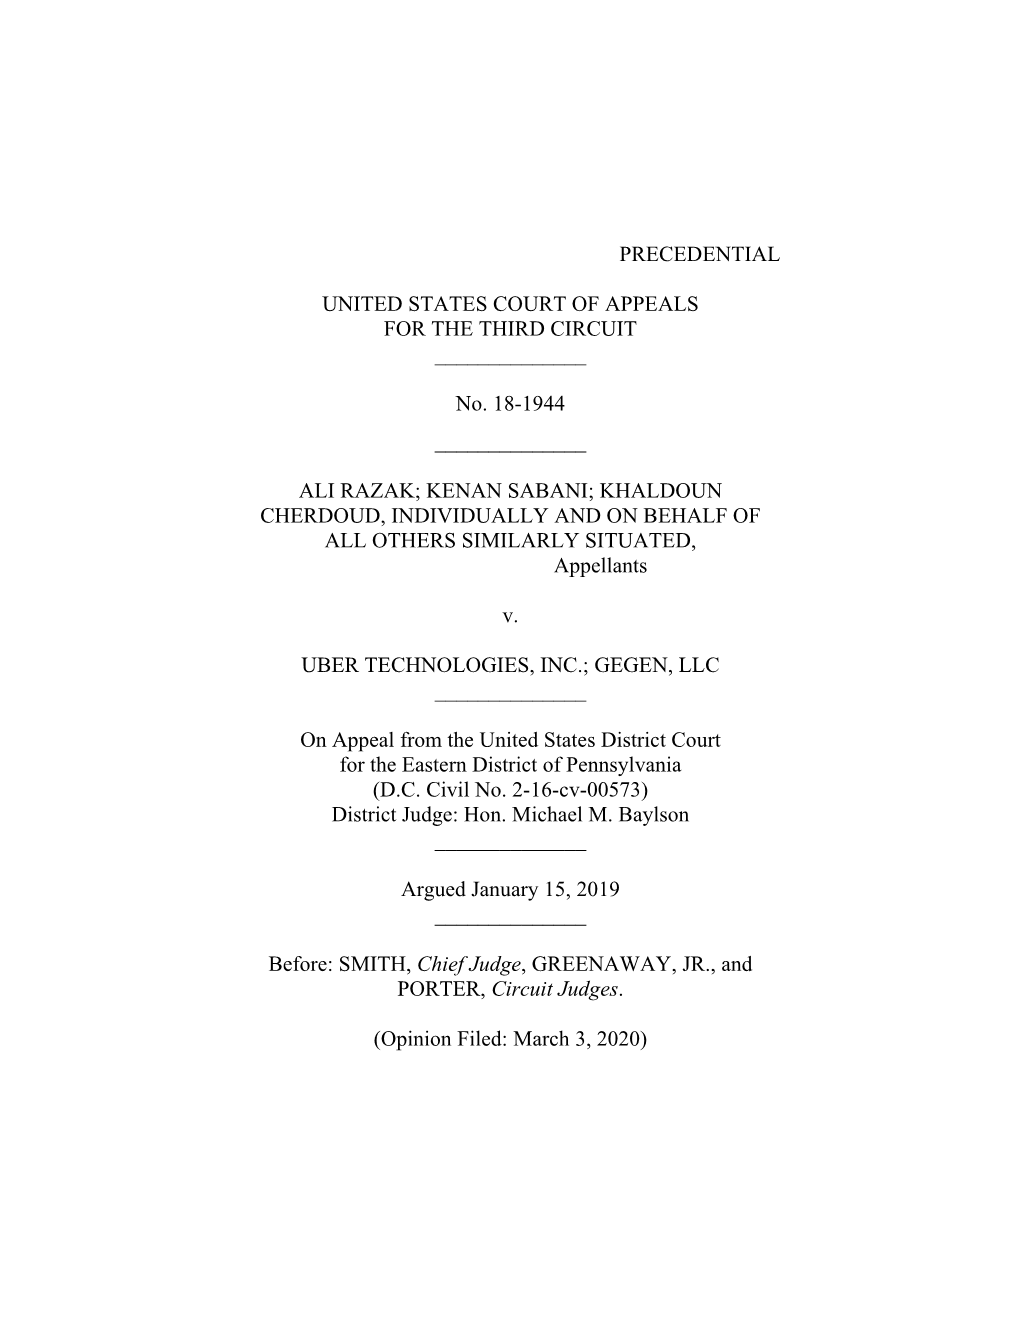 PRECEDENTIAL UNITED STATES COURT of APPEALS for the THIRD CIRCUIT No. 18-1944 ALI RAZAK; KENAN